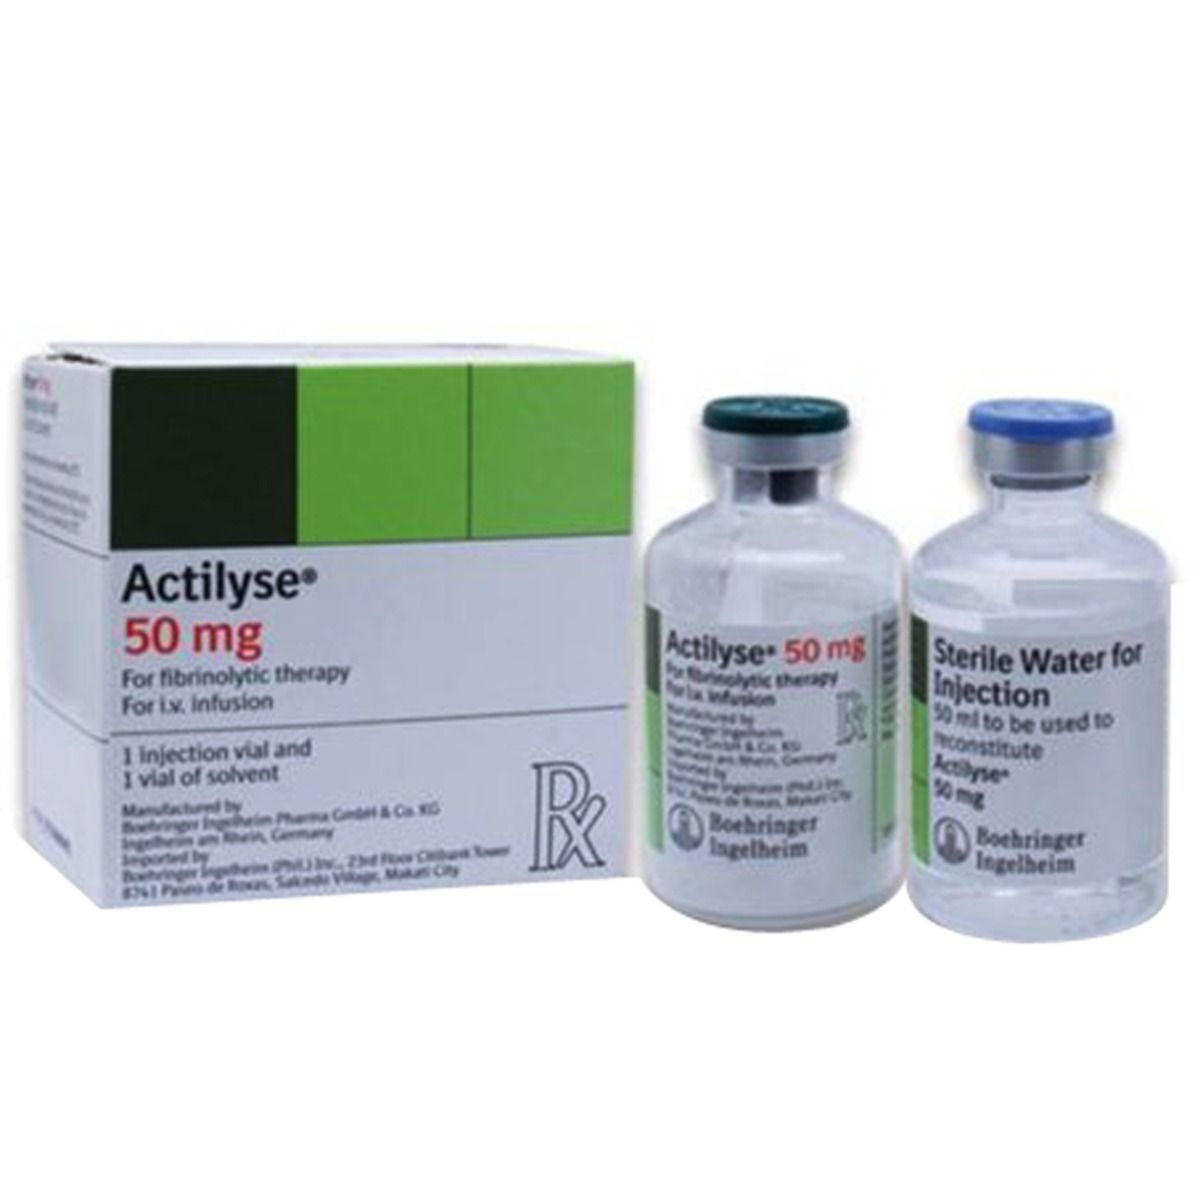 Buy Actilyse 50 mg Injection Online